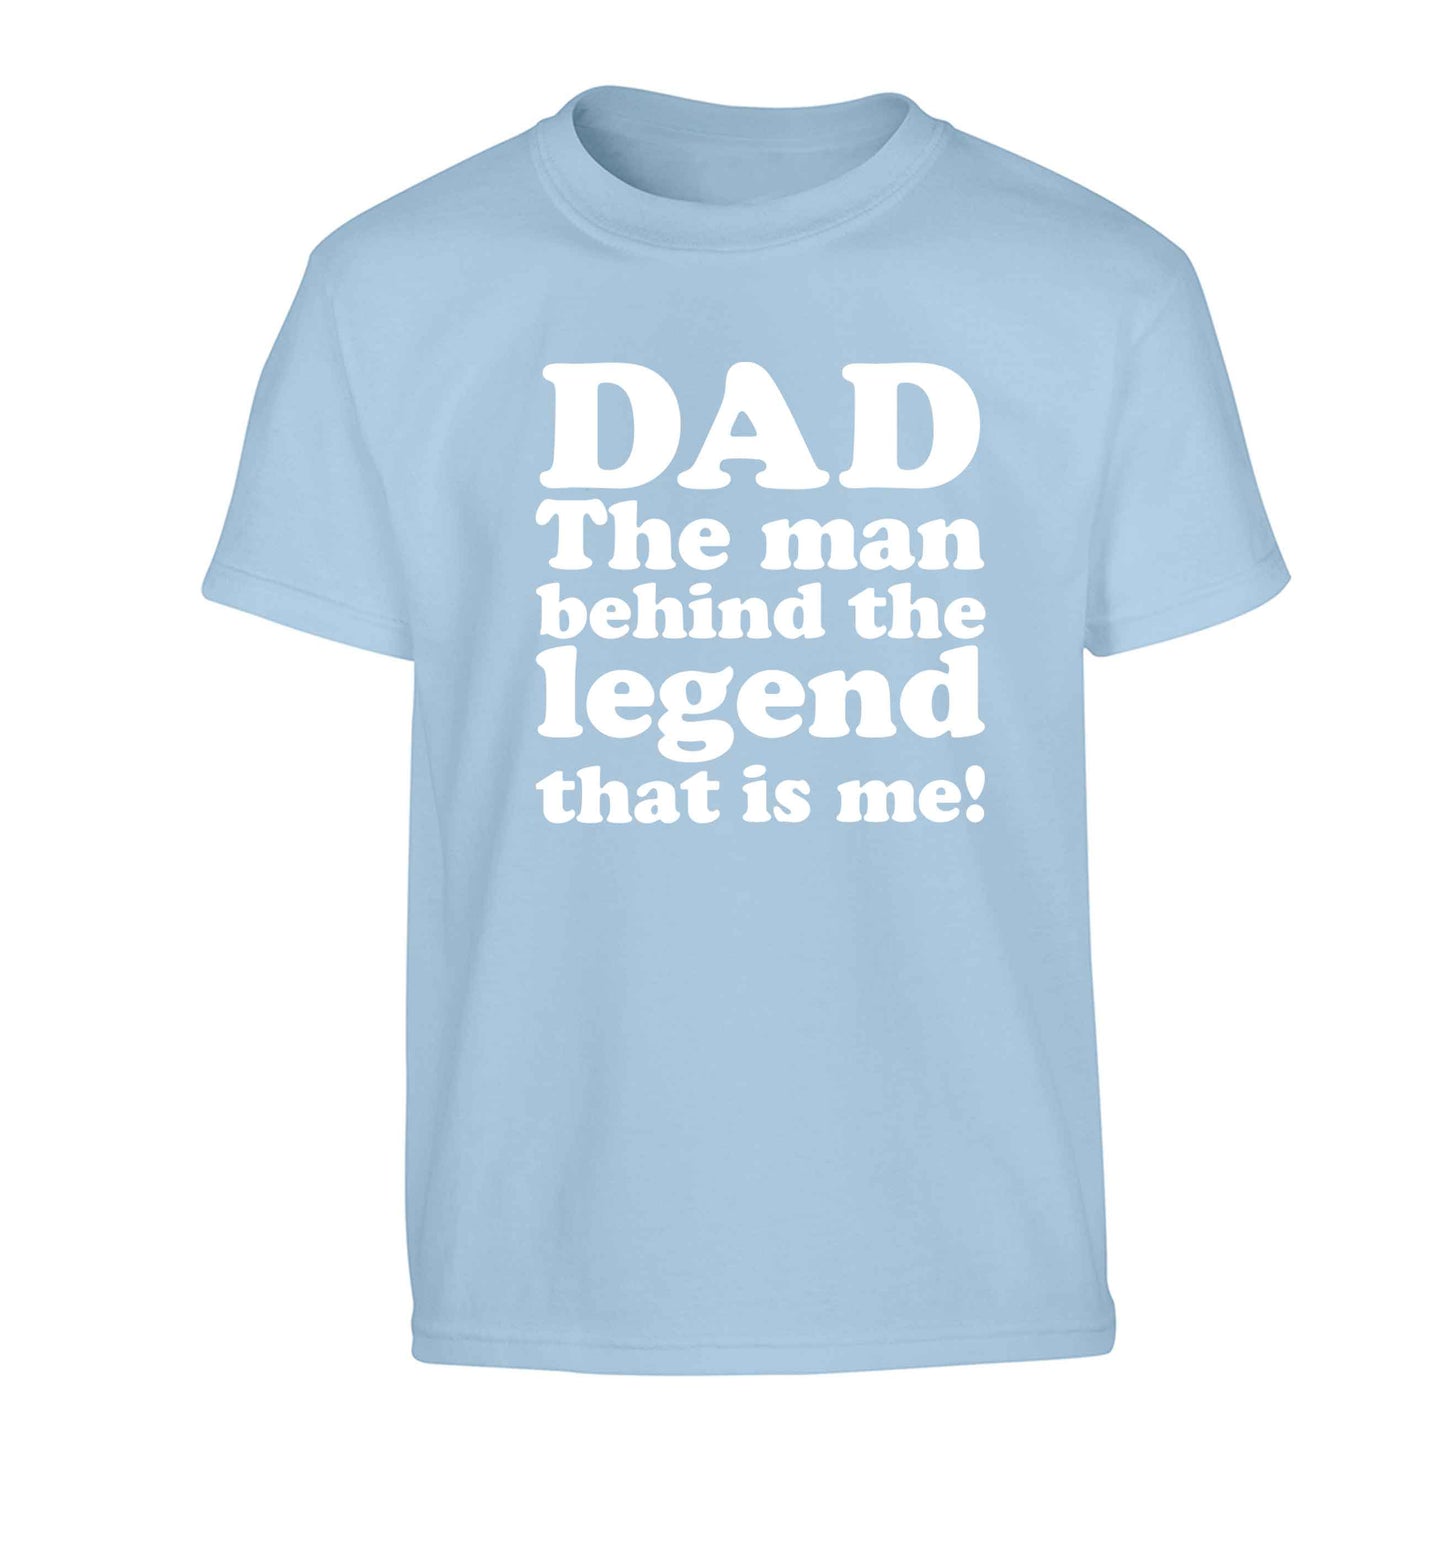 Dad the man behind the legend that is me Children's light blue Tshirt 12-13 Years